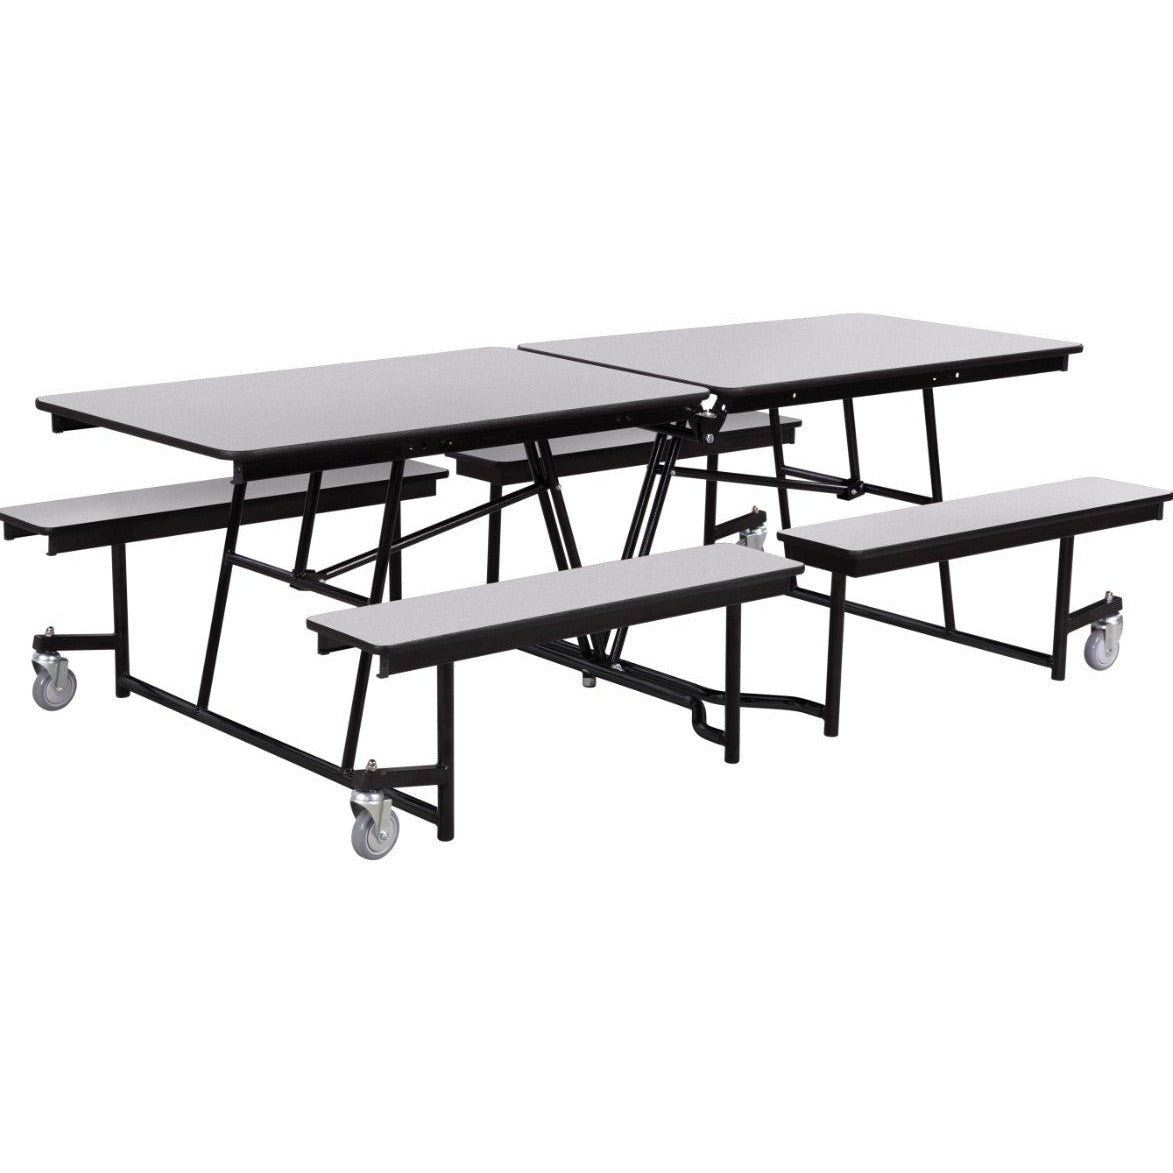 NPS Bench Cafeteria Table - 12' - MDF Core - ProtectEdge - Black Powdercoating Frame - Grey Nebula Table Top - Grey Nebula Bench